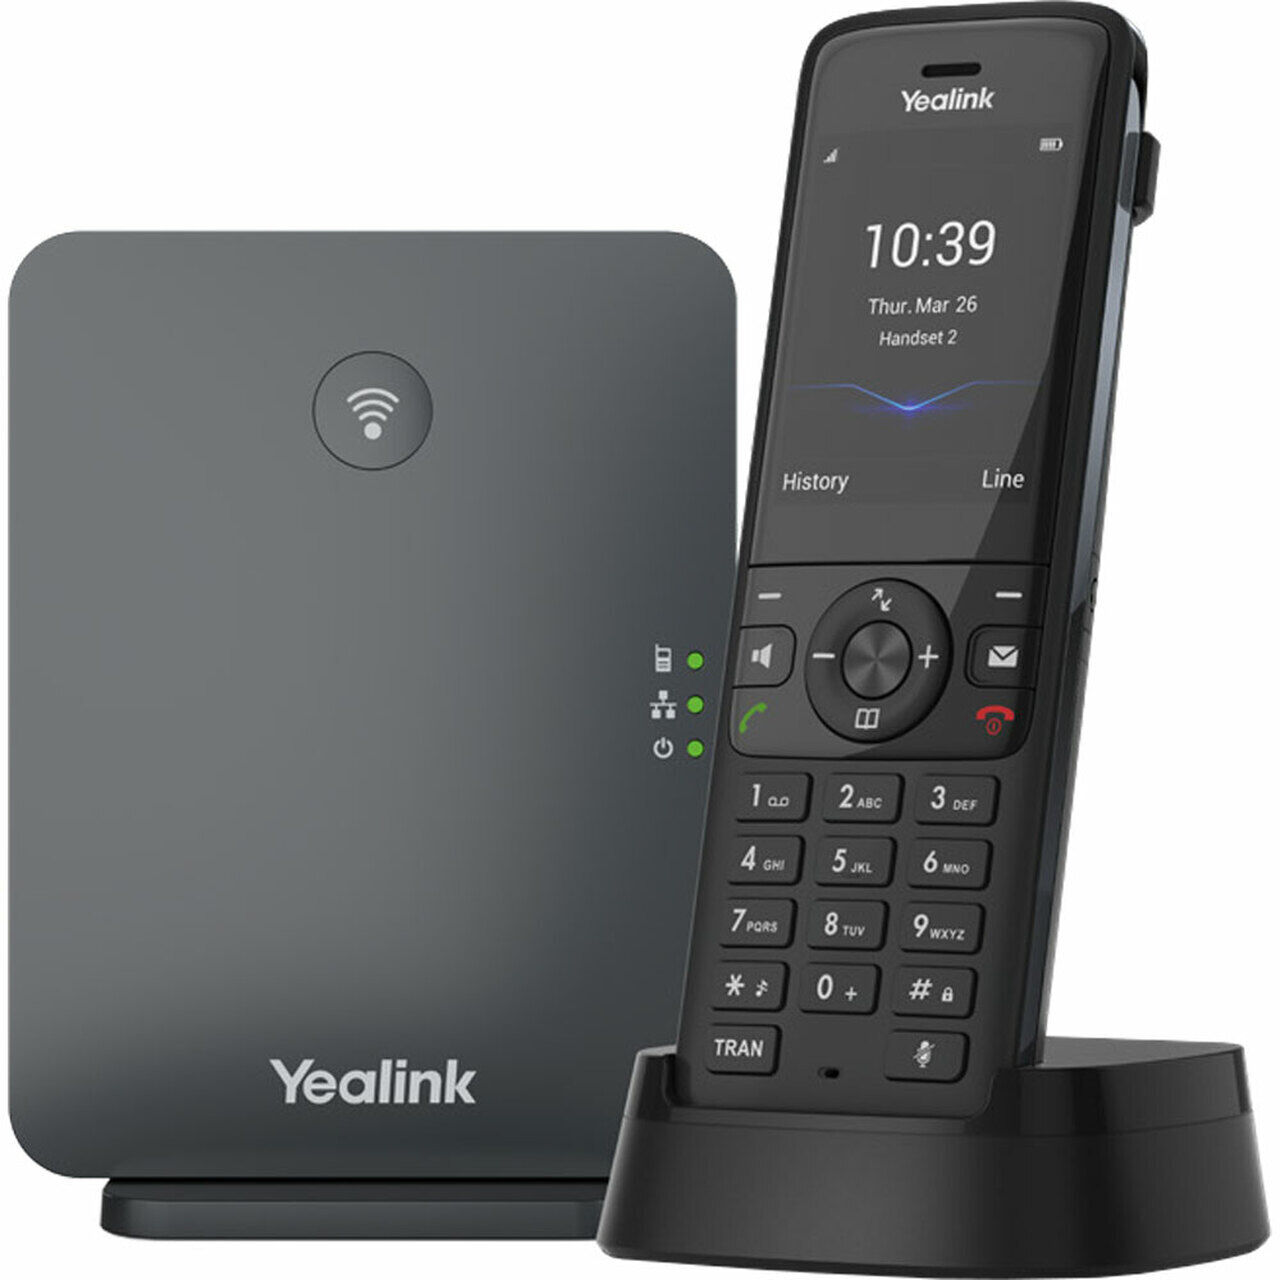 Yealink 1302026 DECT IP Phone System W78P UPC 841885109125 - VOIP and UC SIP ...